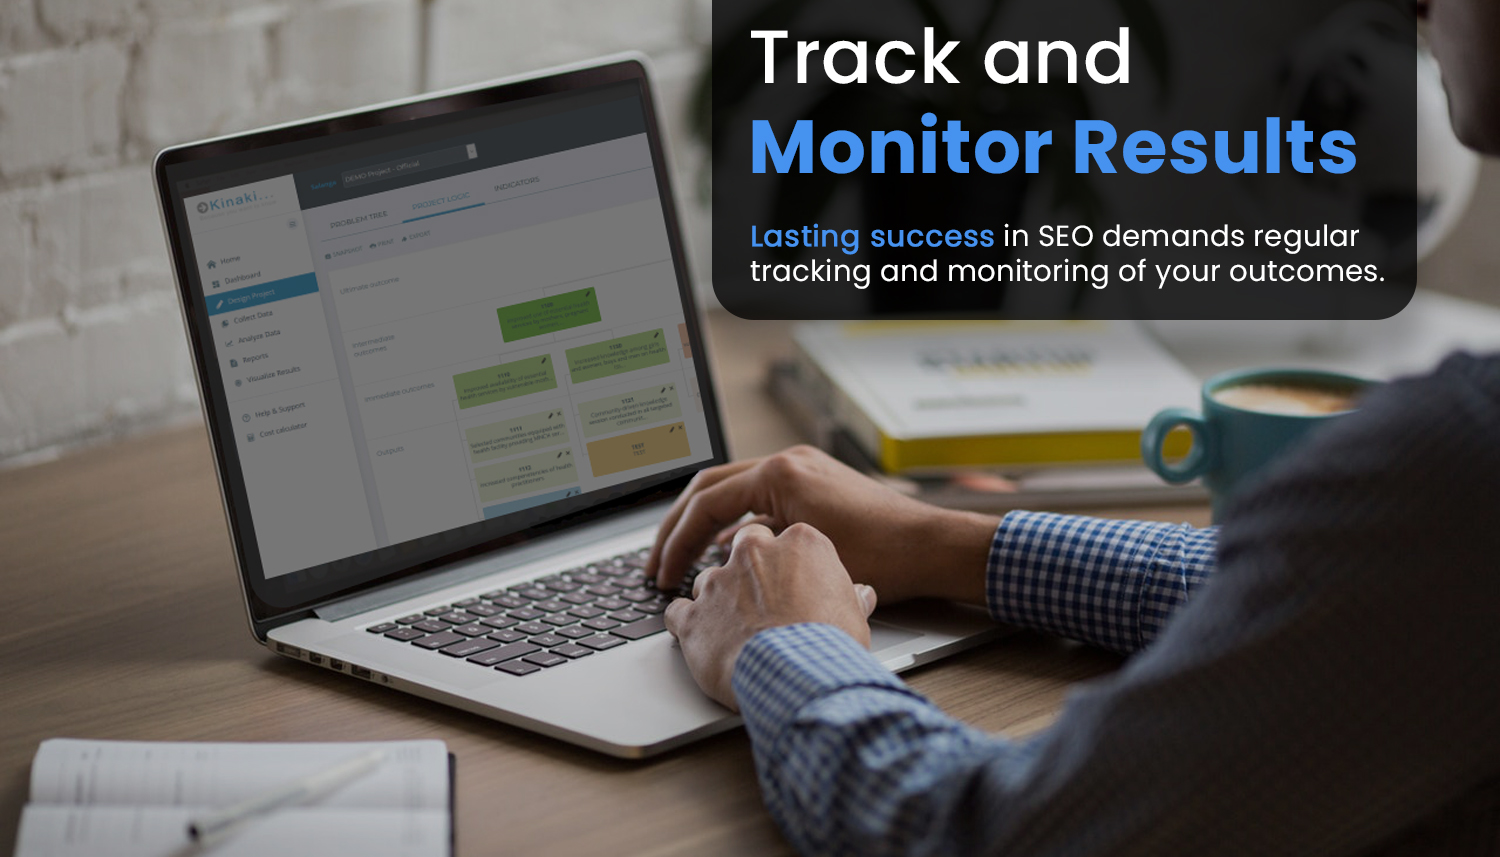 Track and Monitor